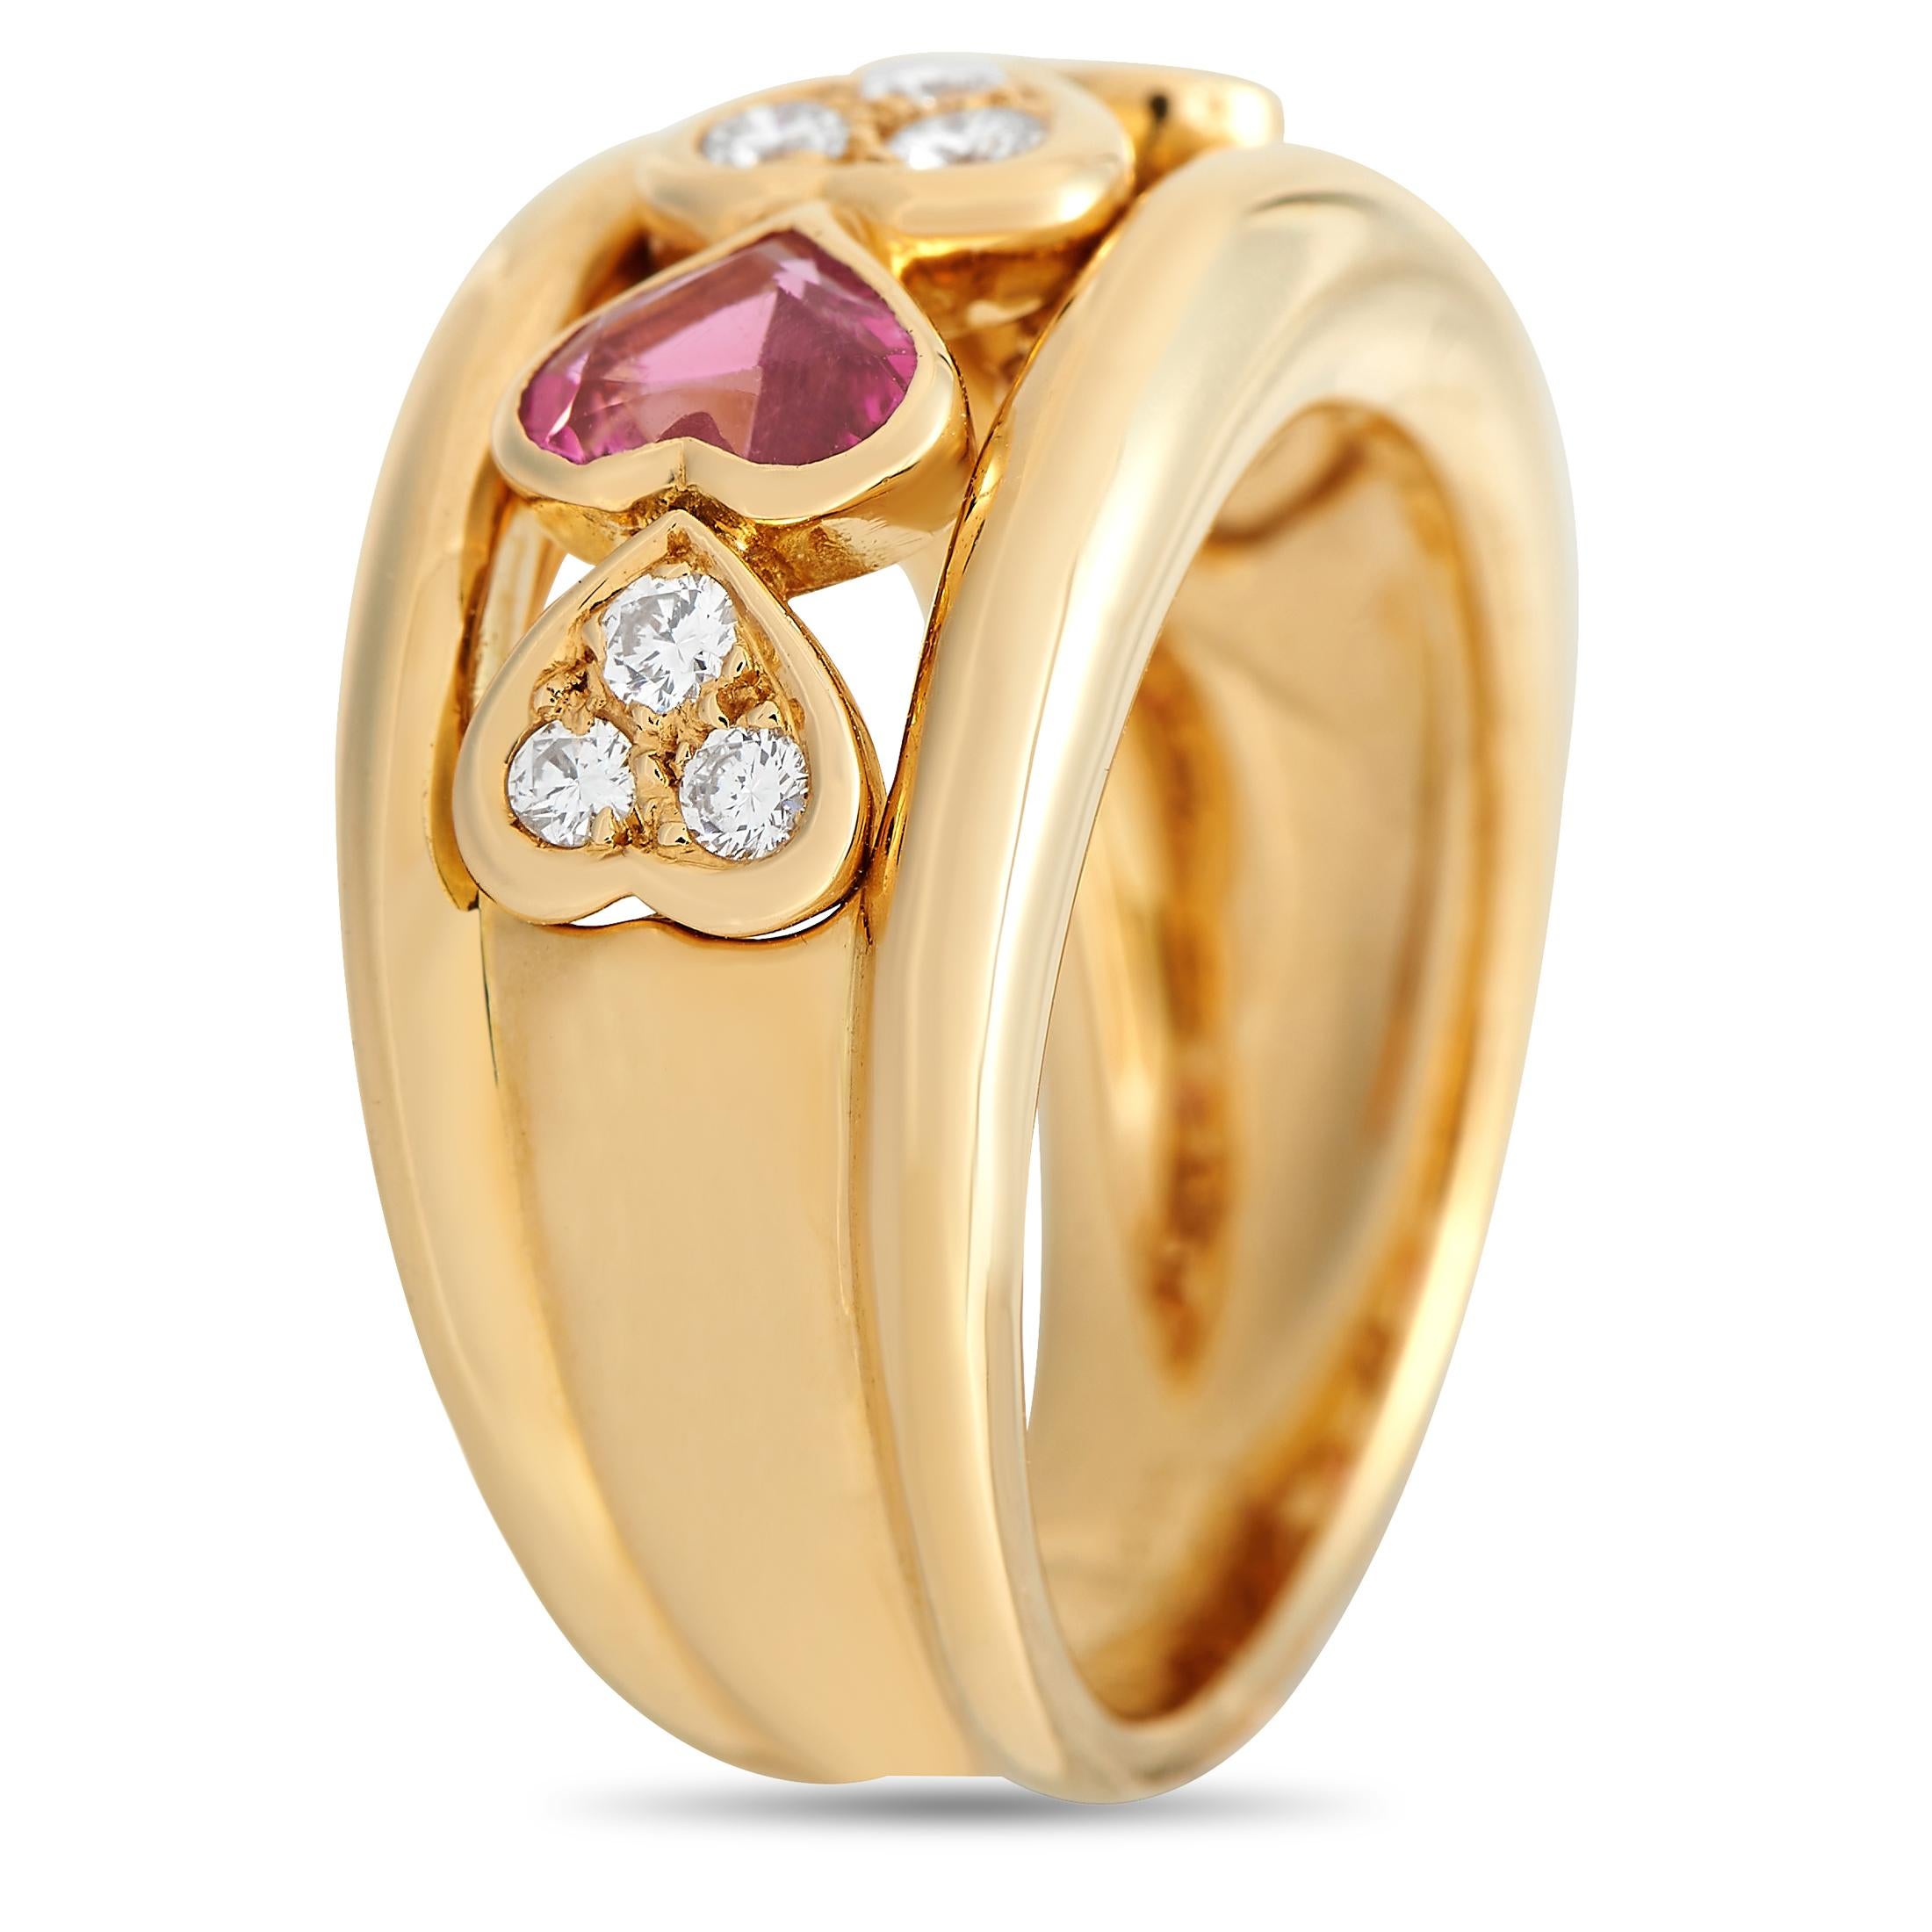 A charming piece from Van Cleef & Arpels, this ring shimmers with sweet glitter from diamonds on heart bezels and faceted heart-shaped pink sapphires. The ring is made out of solid 18K yellow gold and has a split shank design. The gap holds a row of